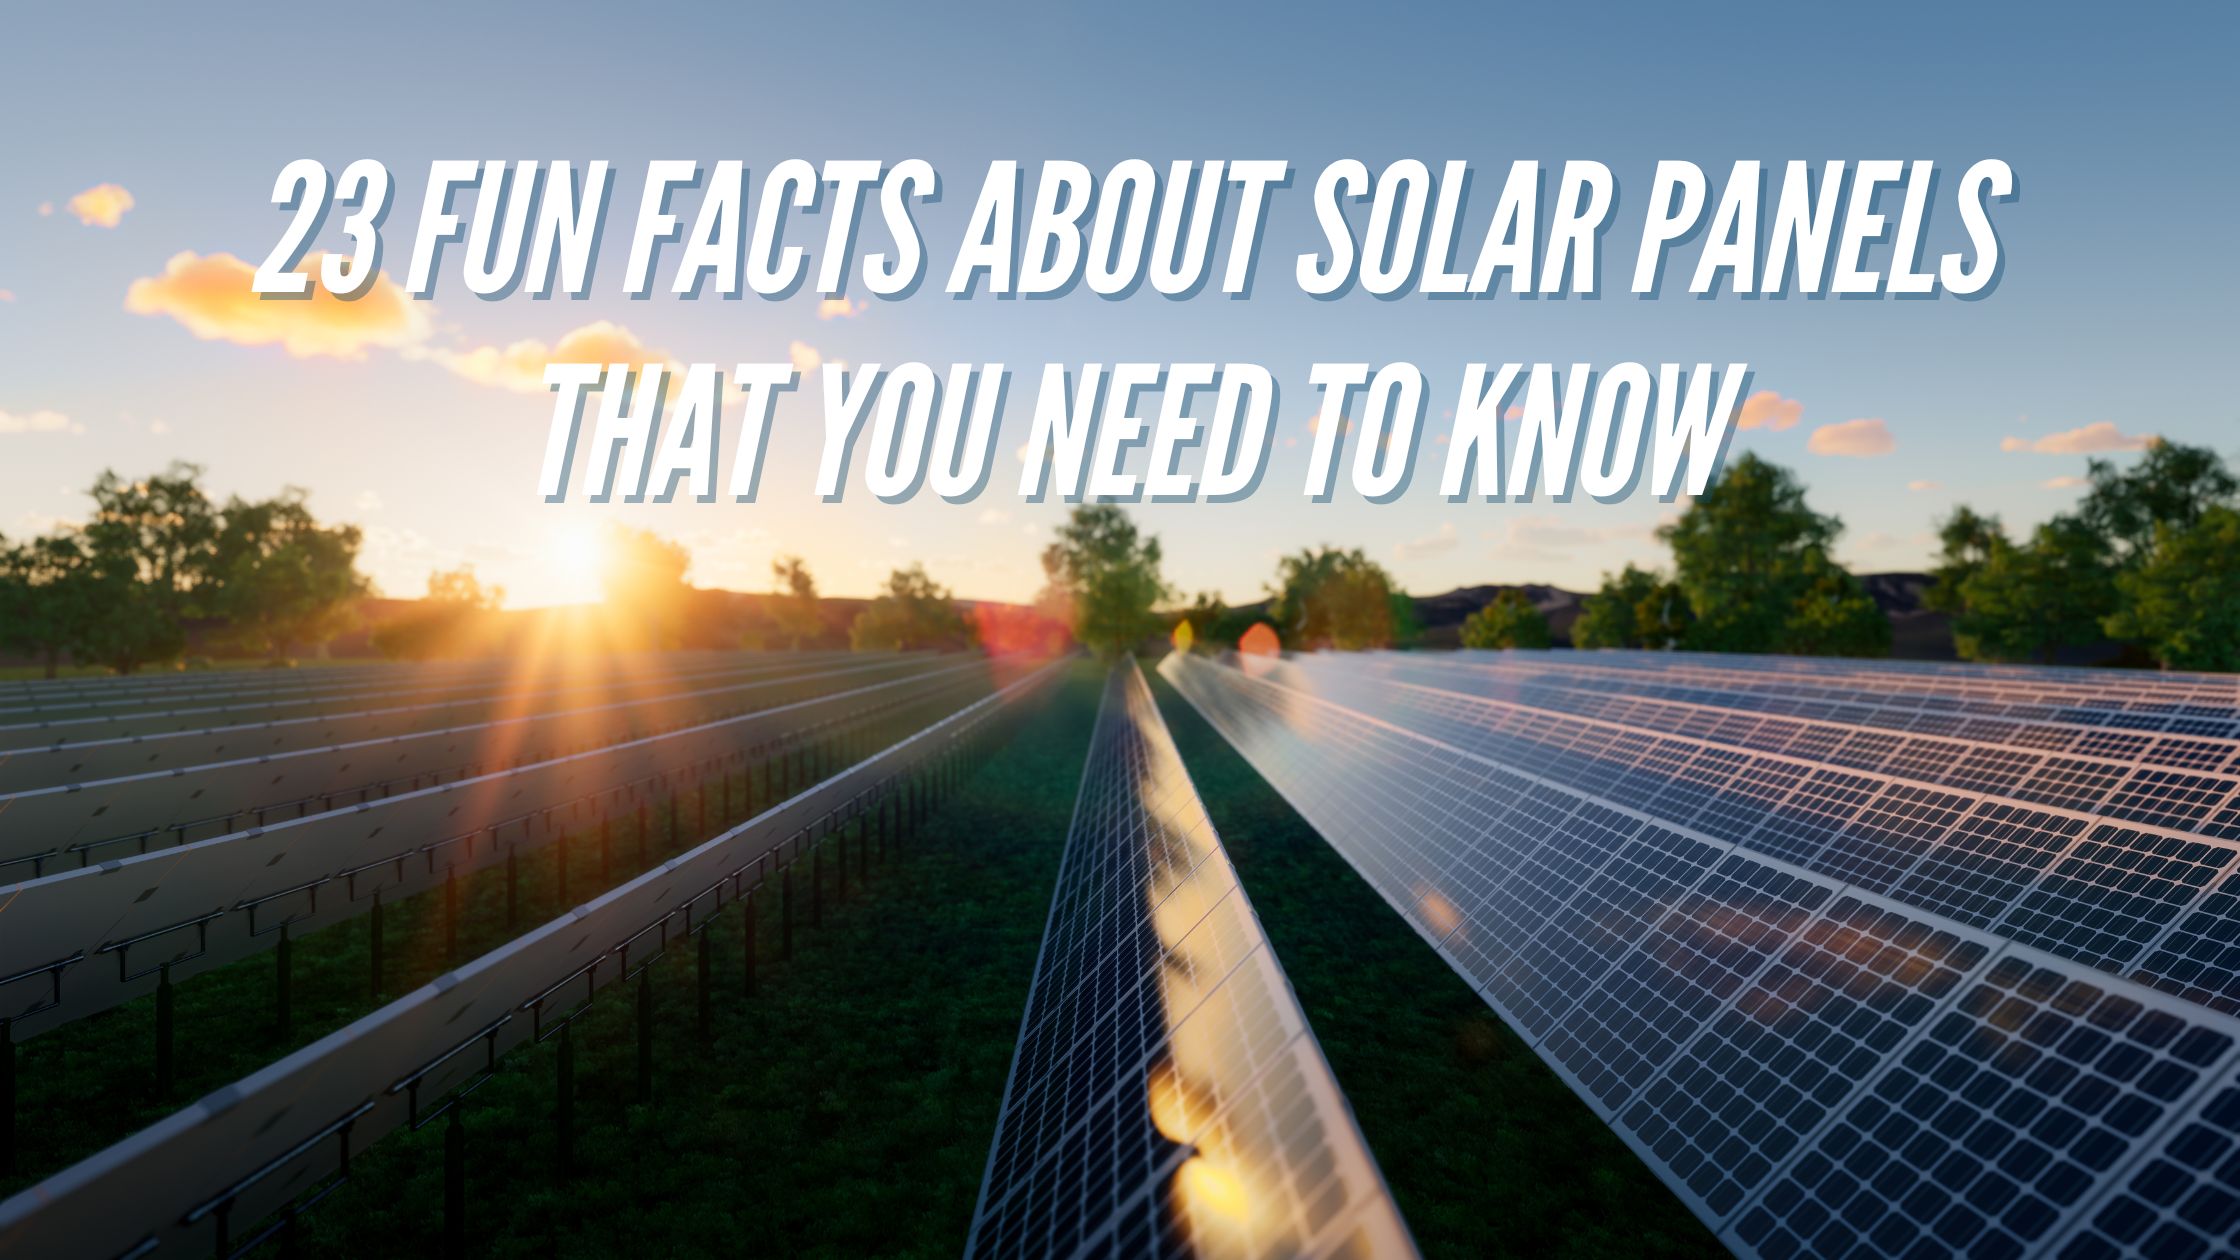 23 Fun Facts about Solar Panels That You Need To Know